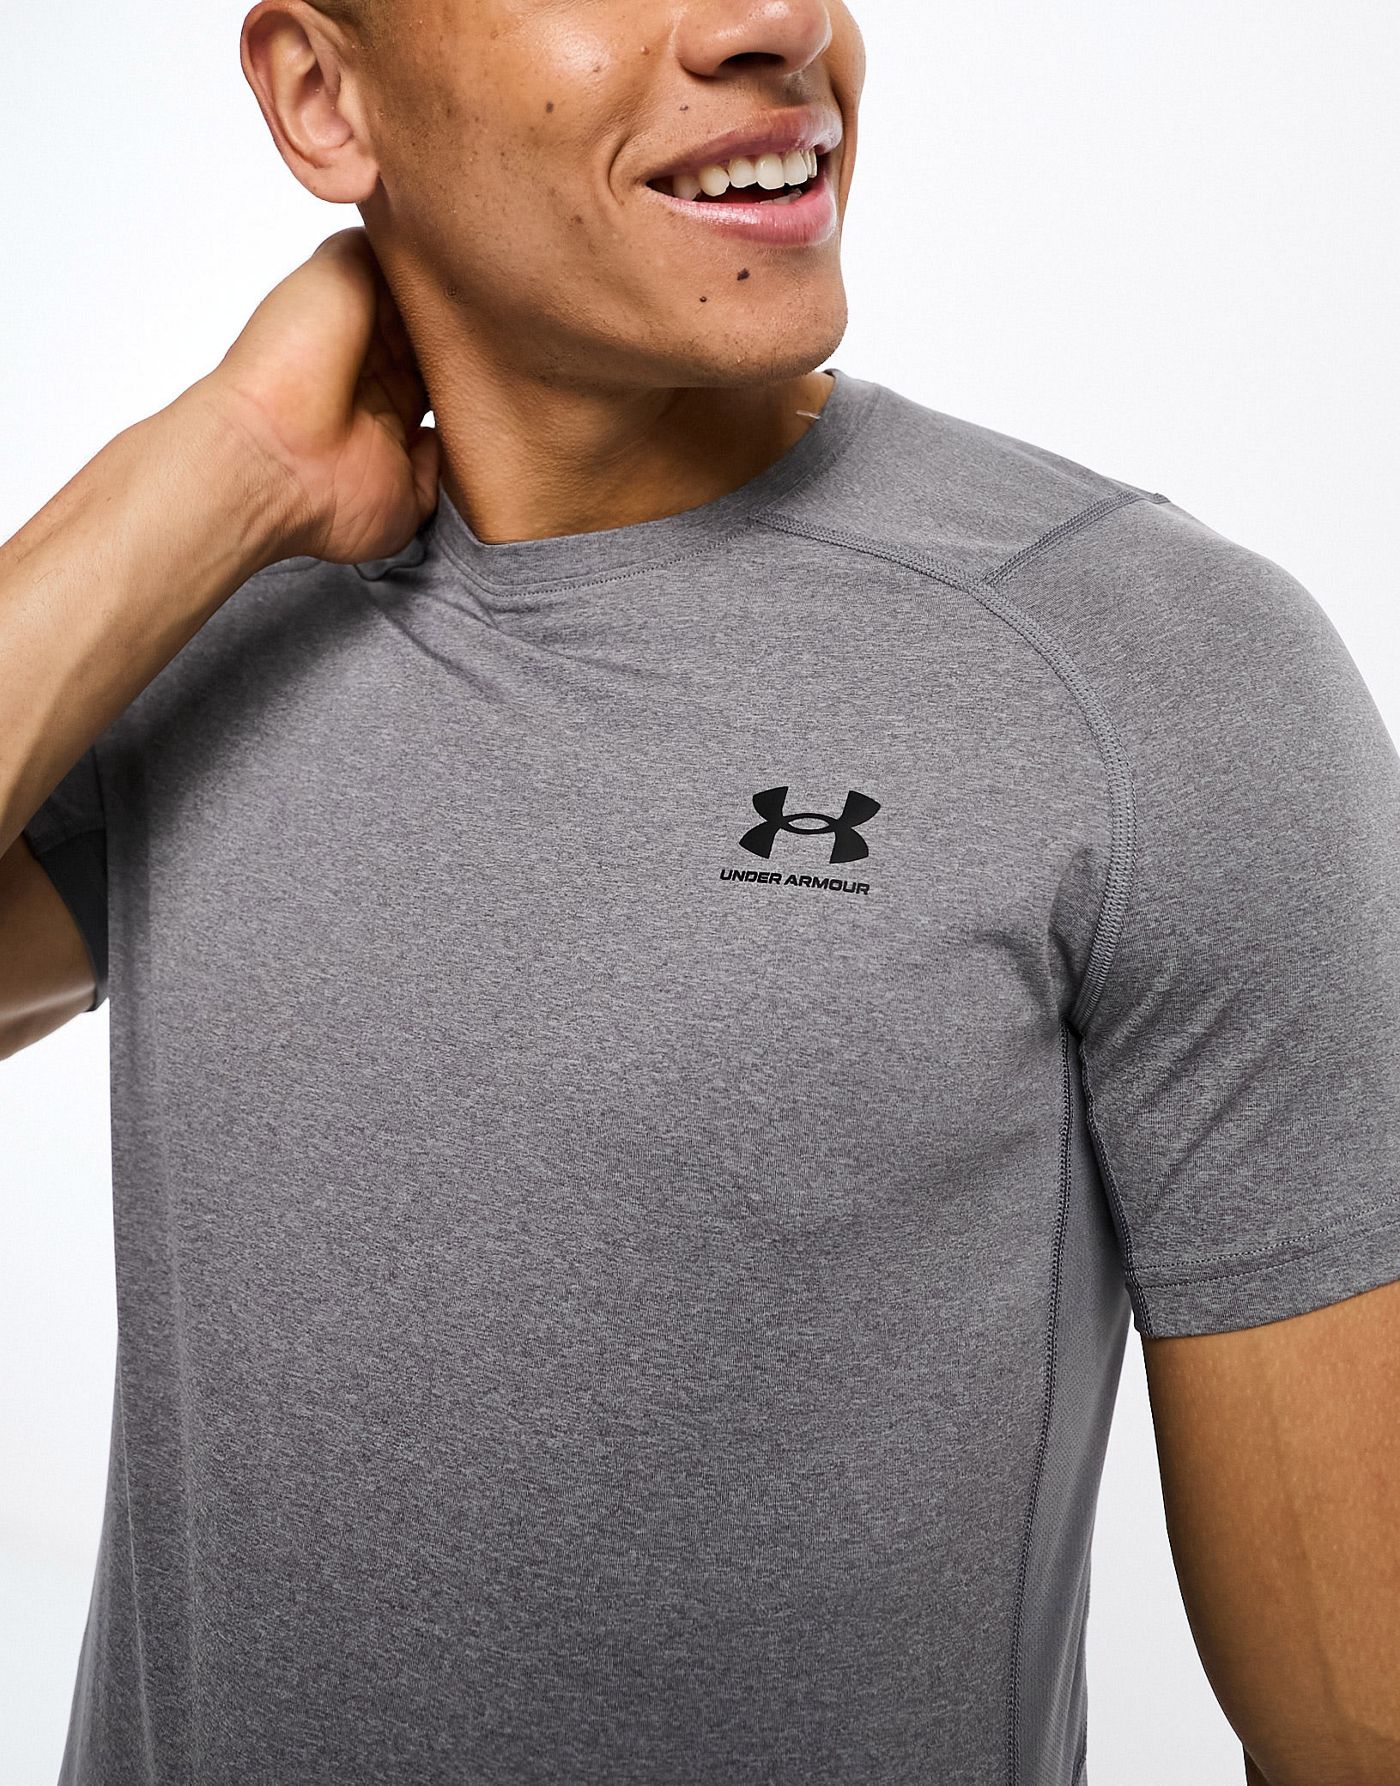 Under Armour Heat Gear Armour fitted t-shirt in grey marl